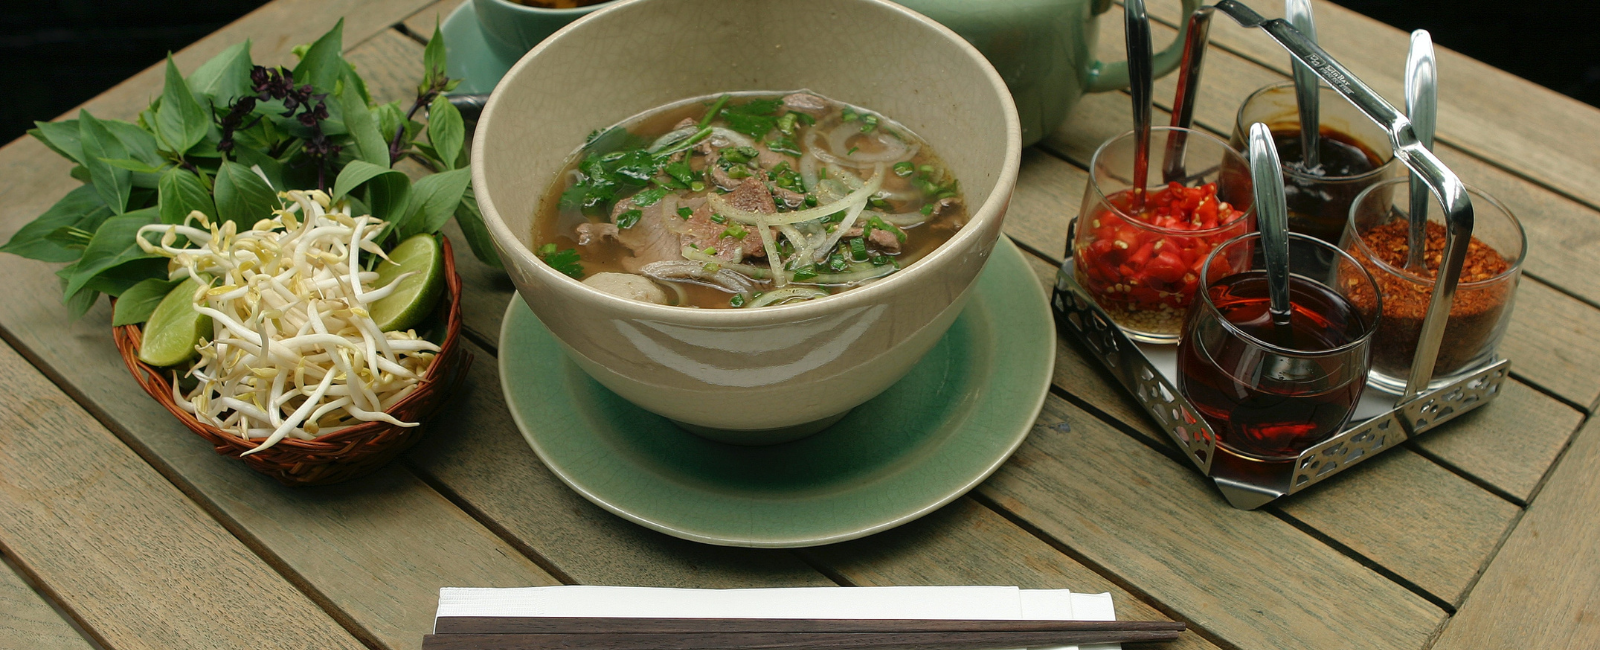 Vietnamese pho and sides